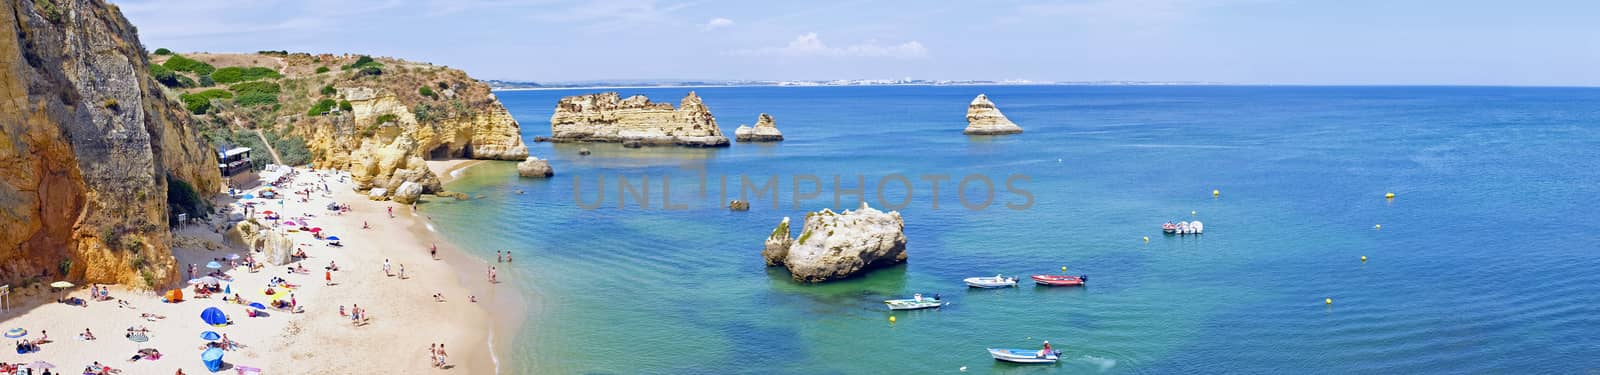 Panorama from the natural rocks and beaches at Lagos Portugal by devy